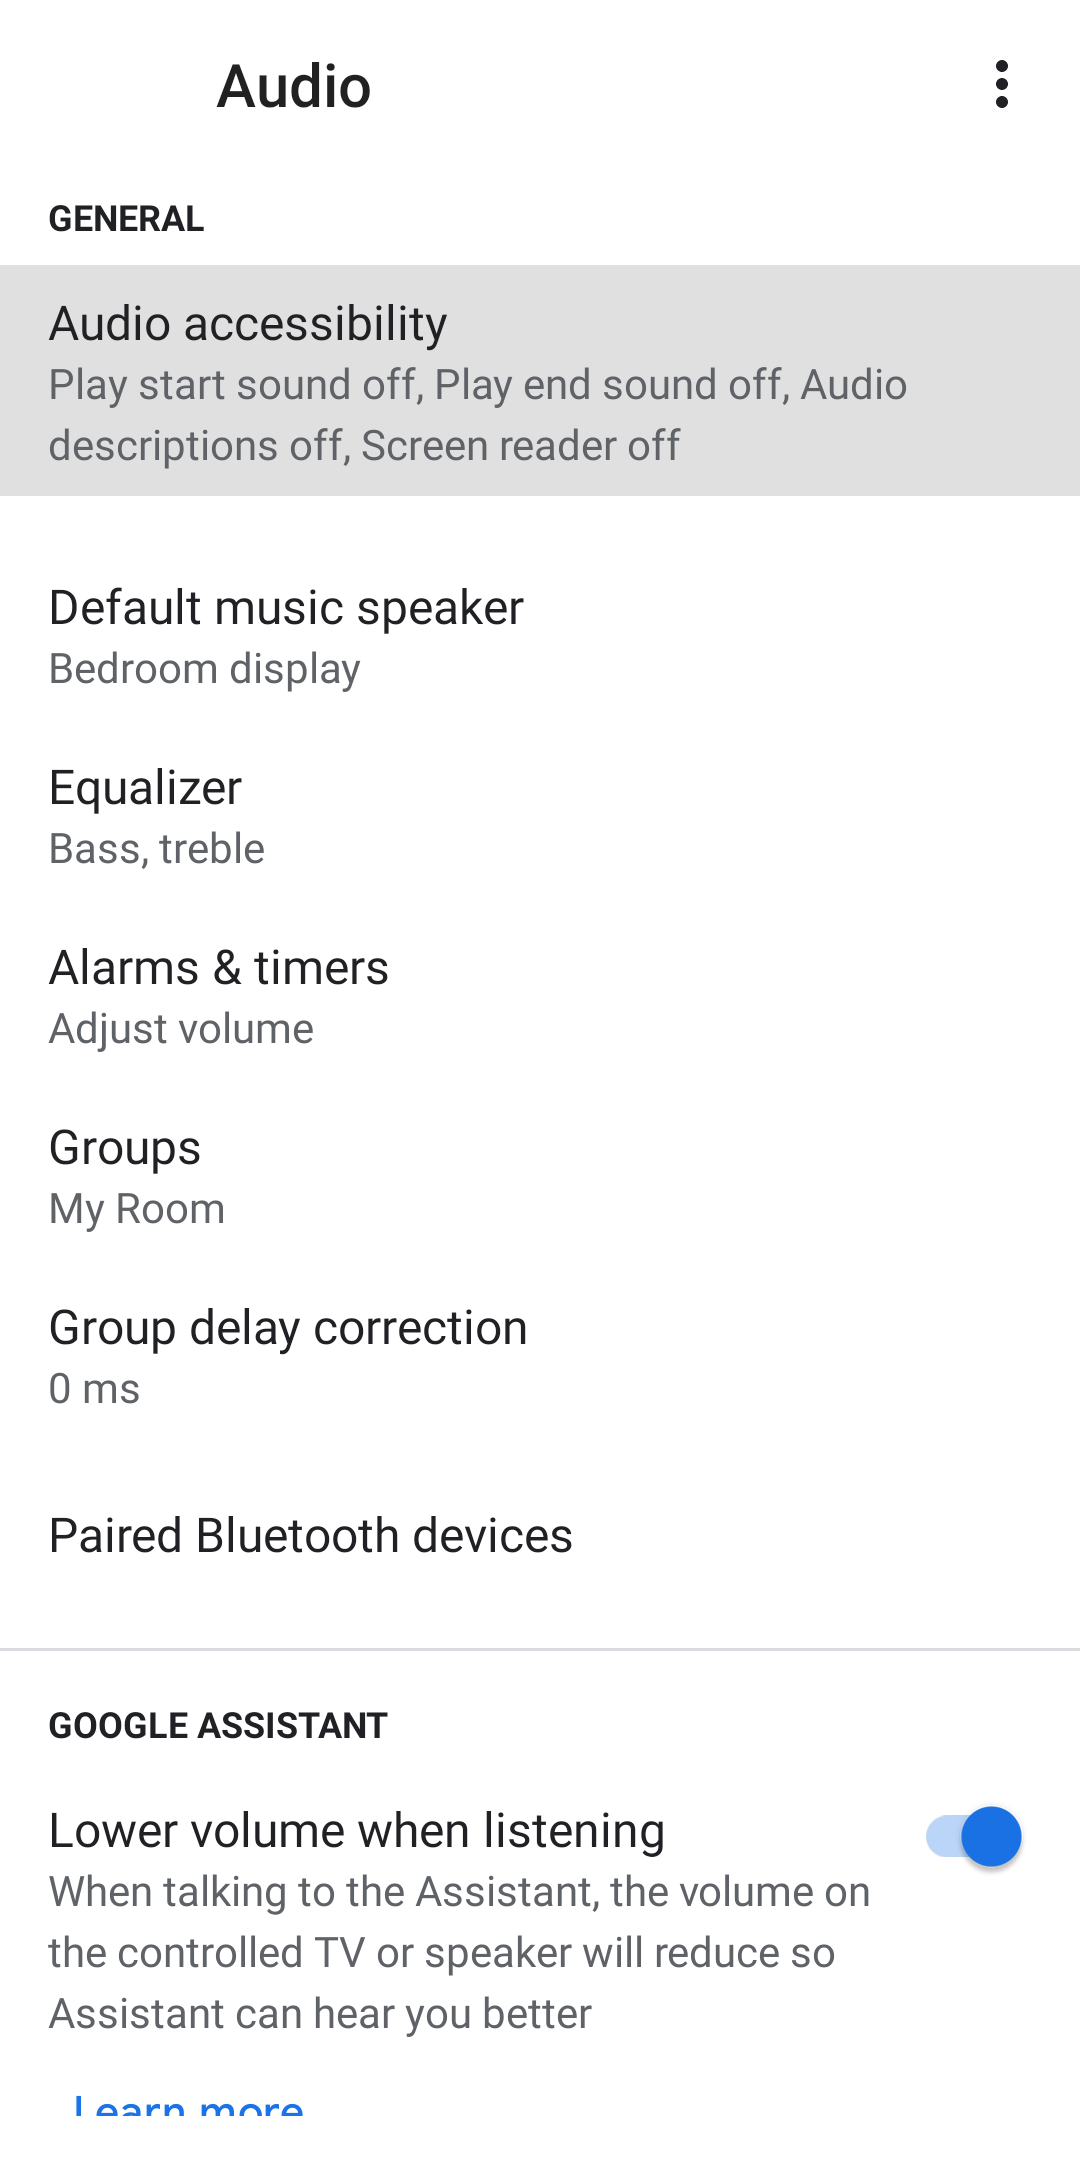 Screenshot shows the Audio settings page in the Google home app.